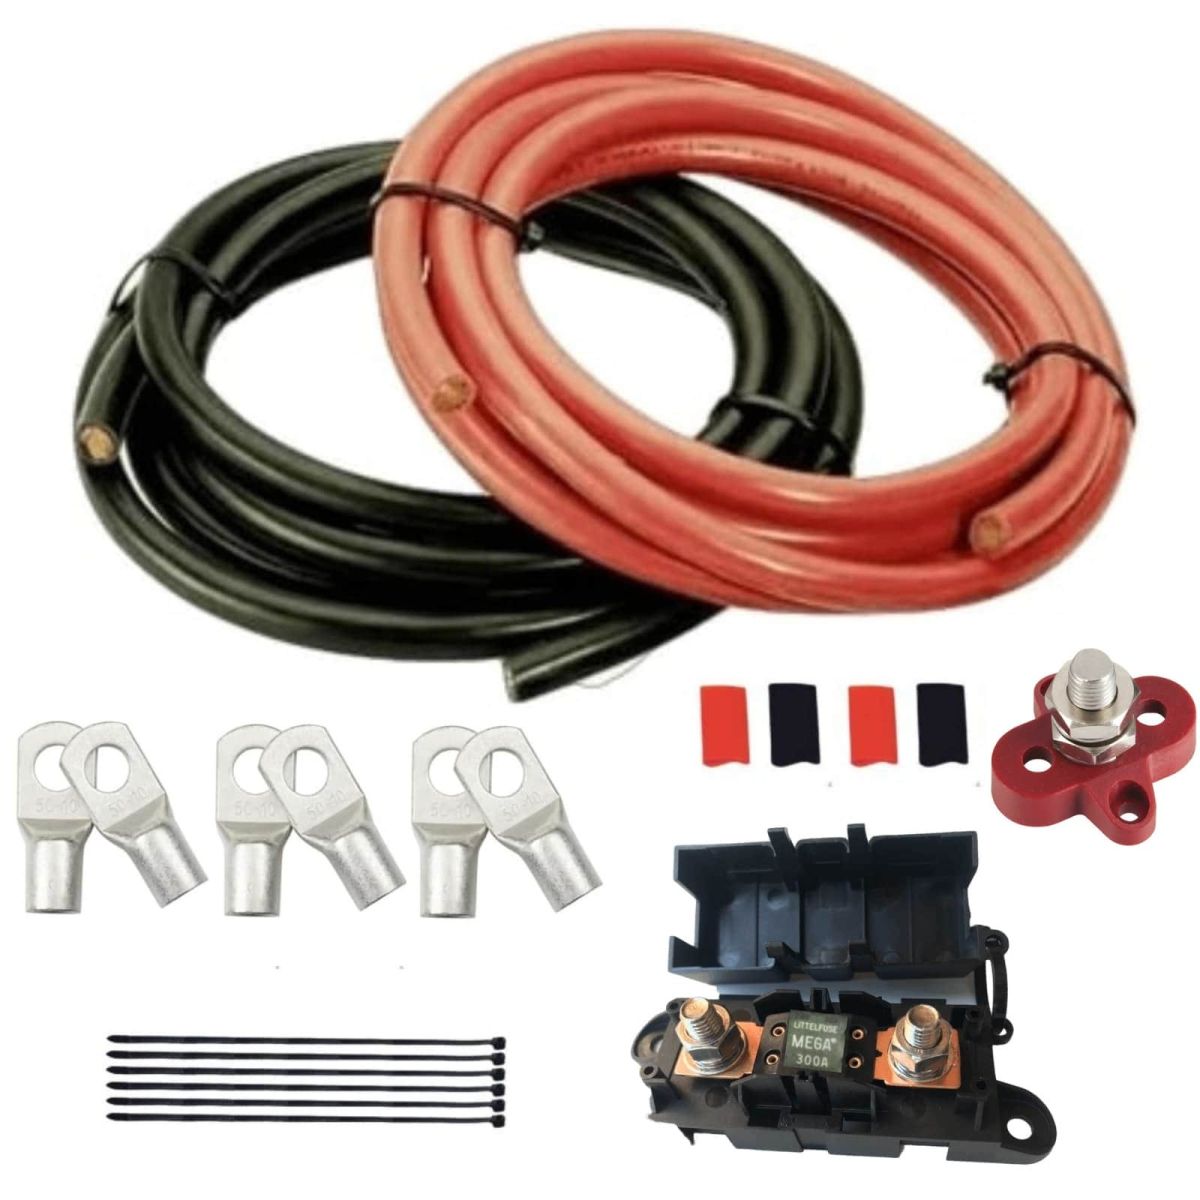 Inverter Cable Kit, 0 B&S 246 AMP cable, 2000W inverter cable